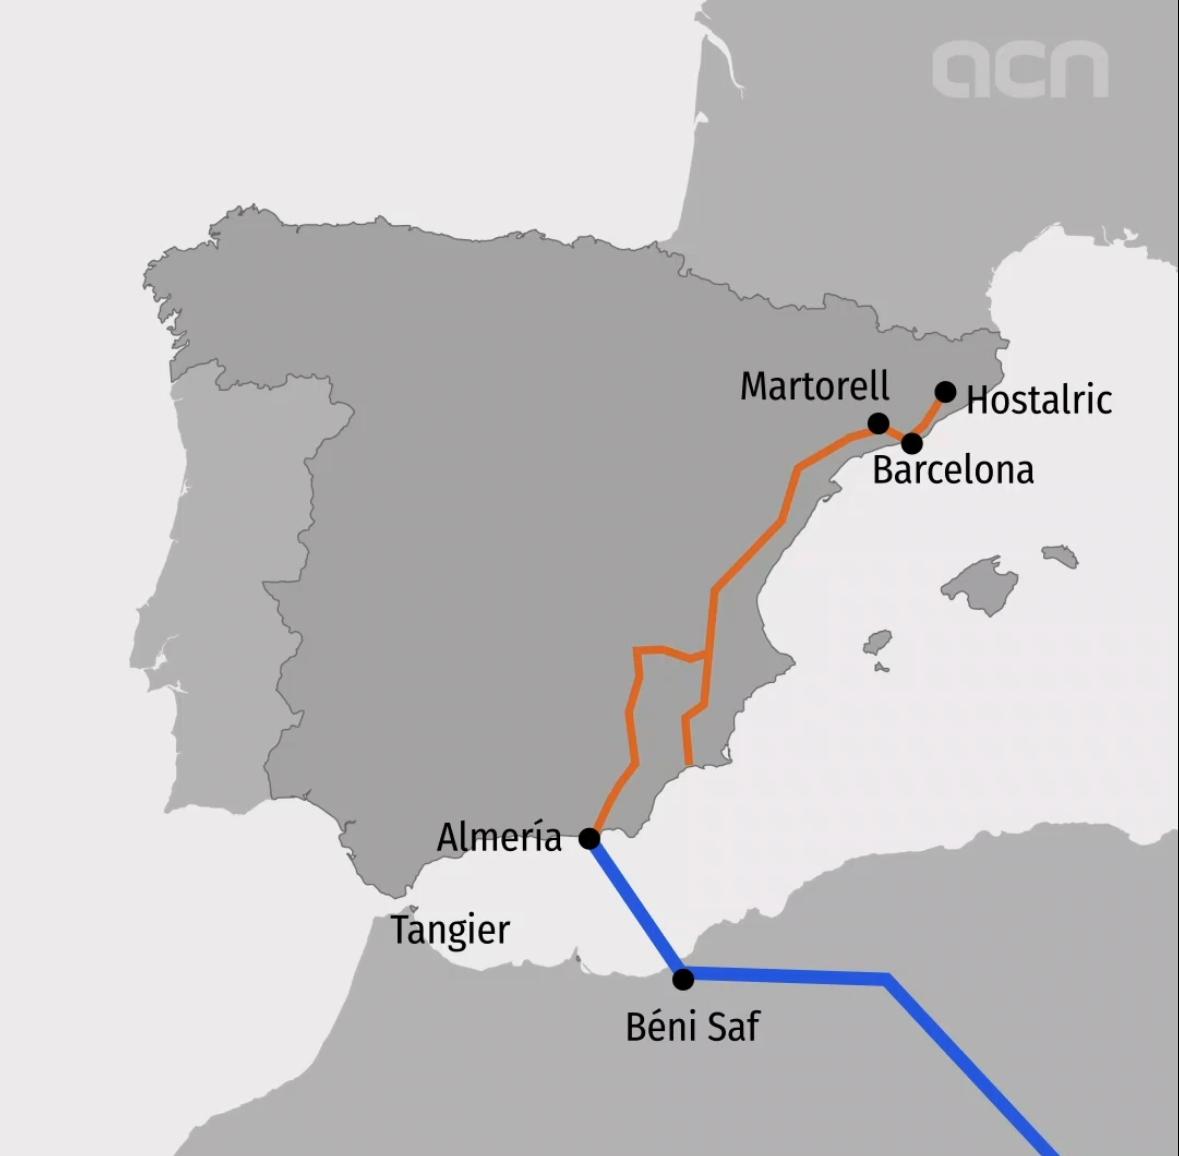 The MedGaz pipeline and its extension reach Barcelona, while the MidCat pipeline was expected to cross the Pyrenees